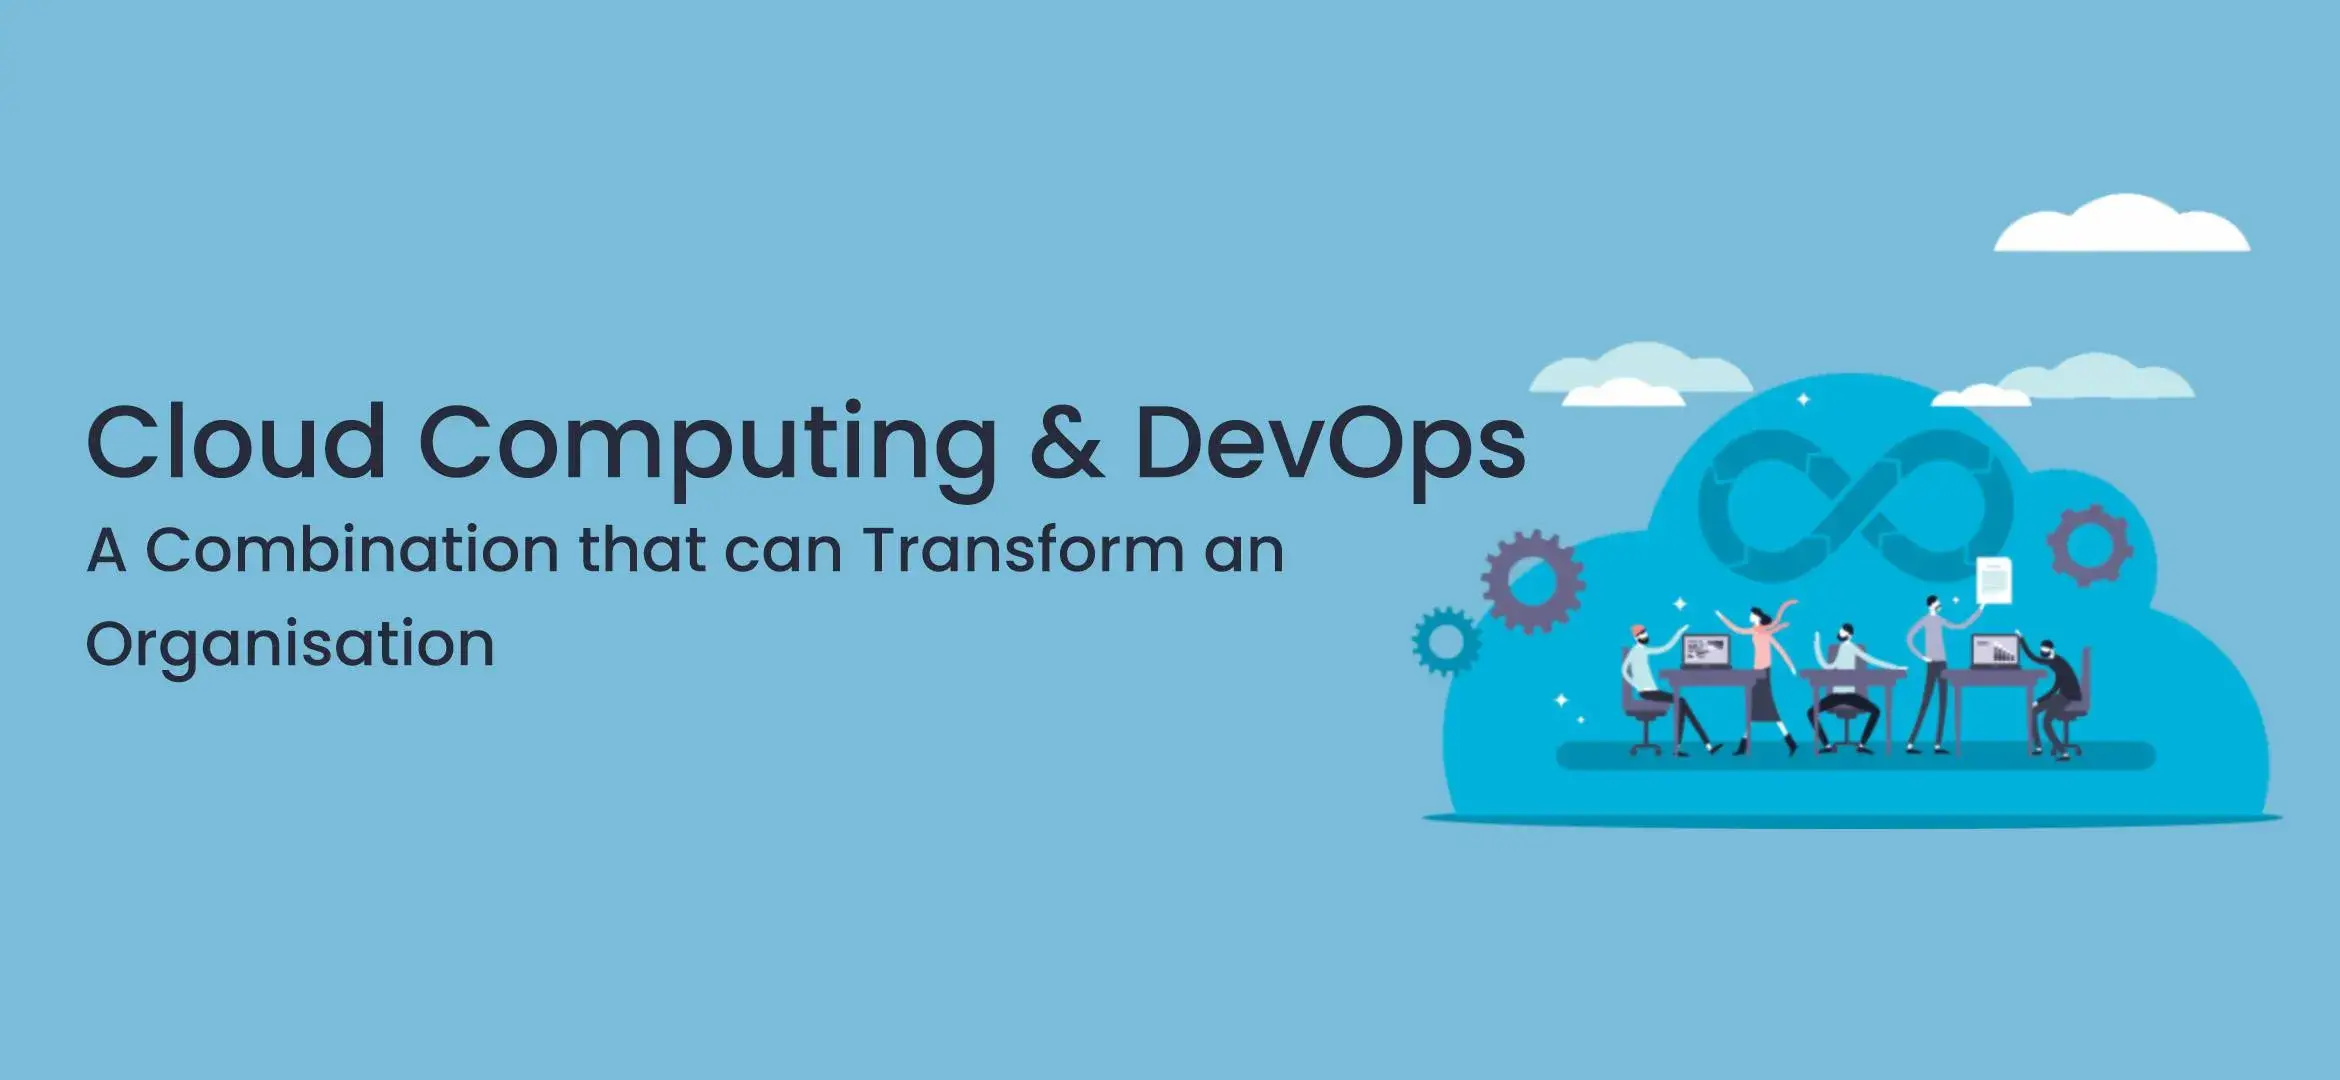 1712234144Cloud Computing and DevOps A Combination that can Transform an Organization.webp